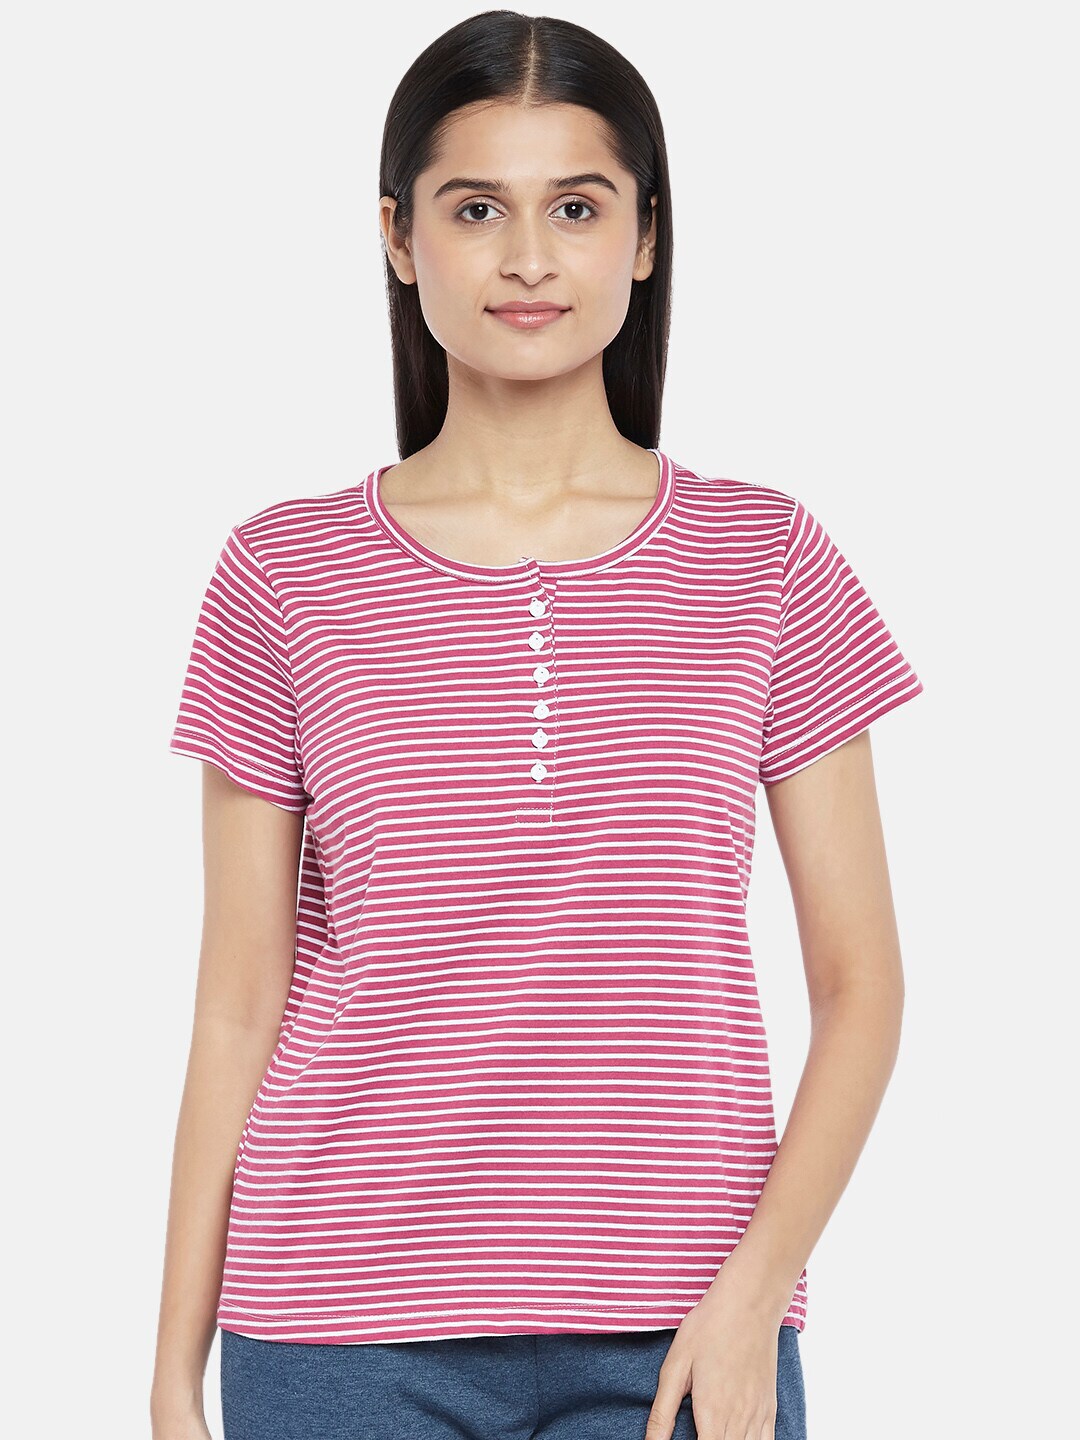 Dreamz by Pantaloons Mauve & White Striped Pure Cotton Lounge tshirt Price in India